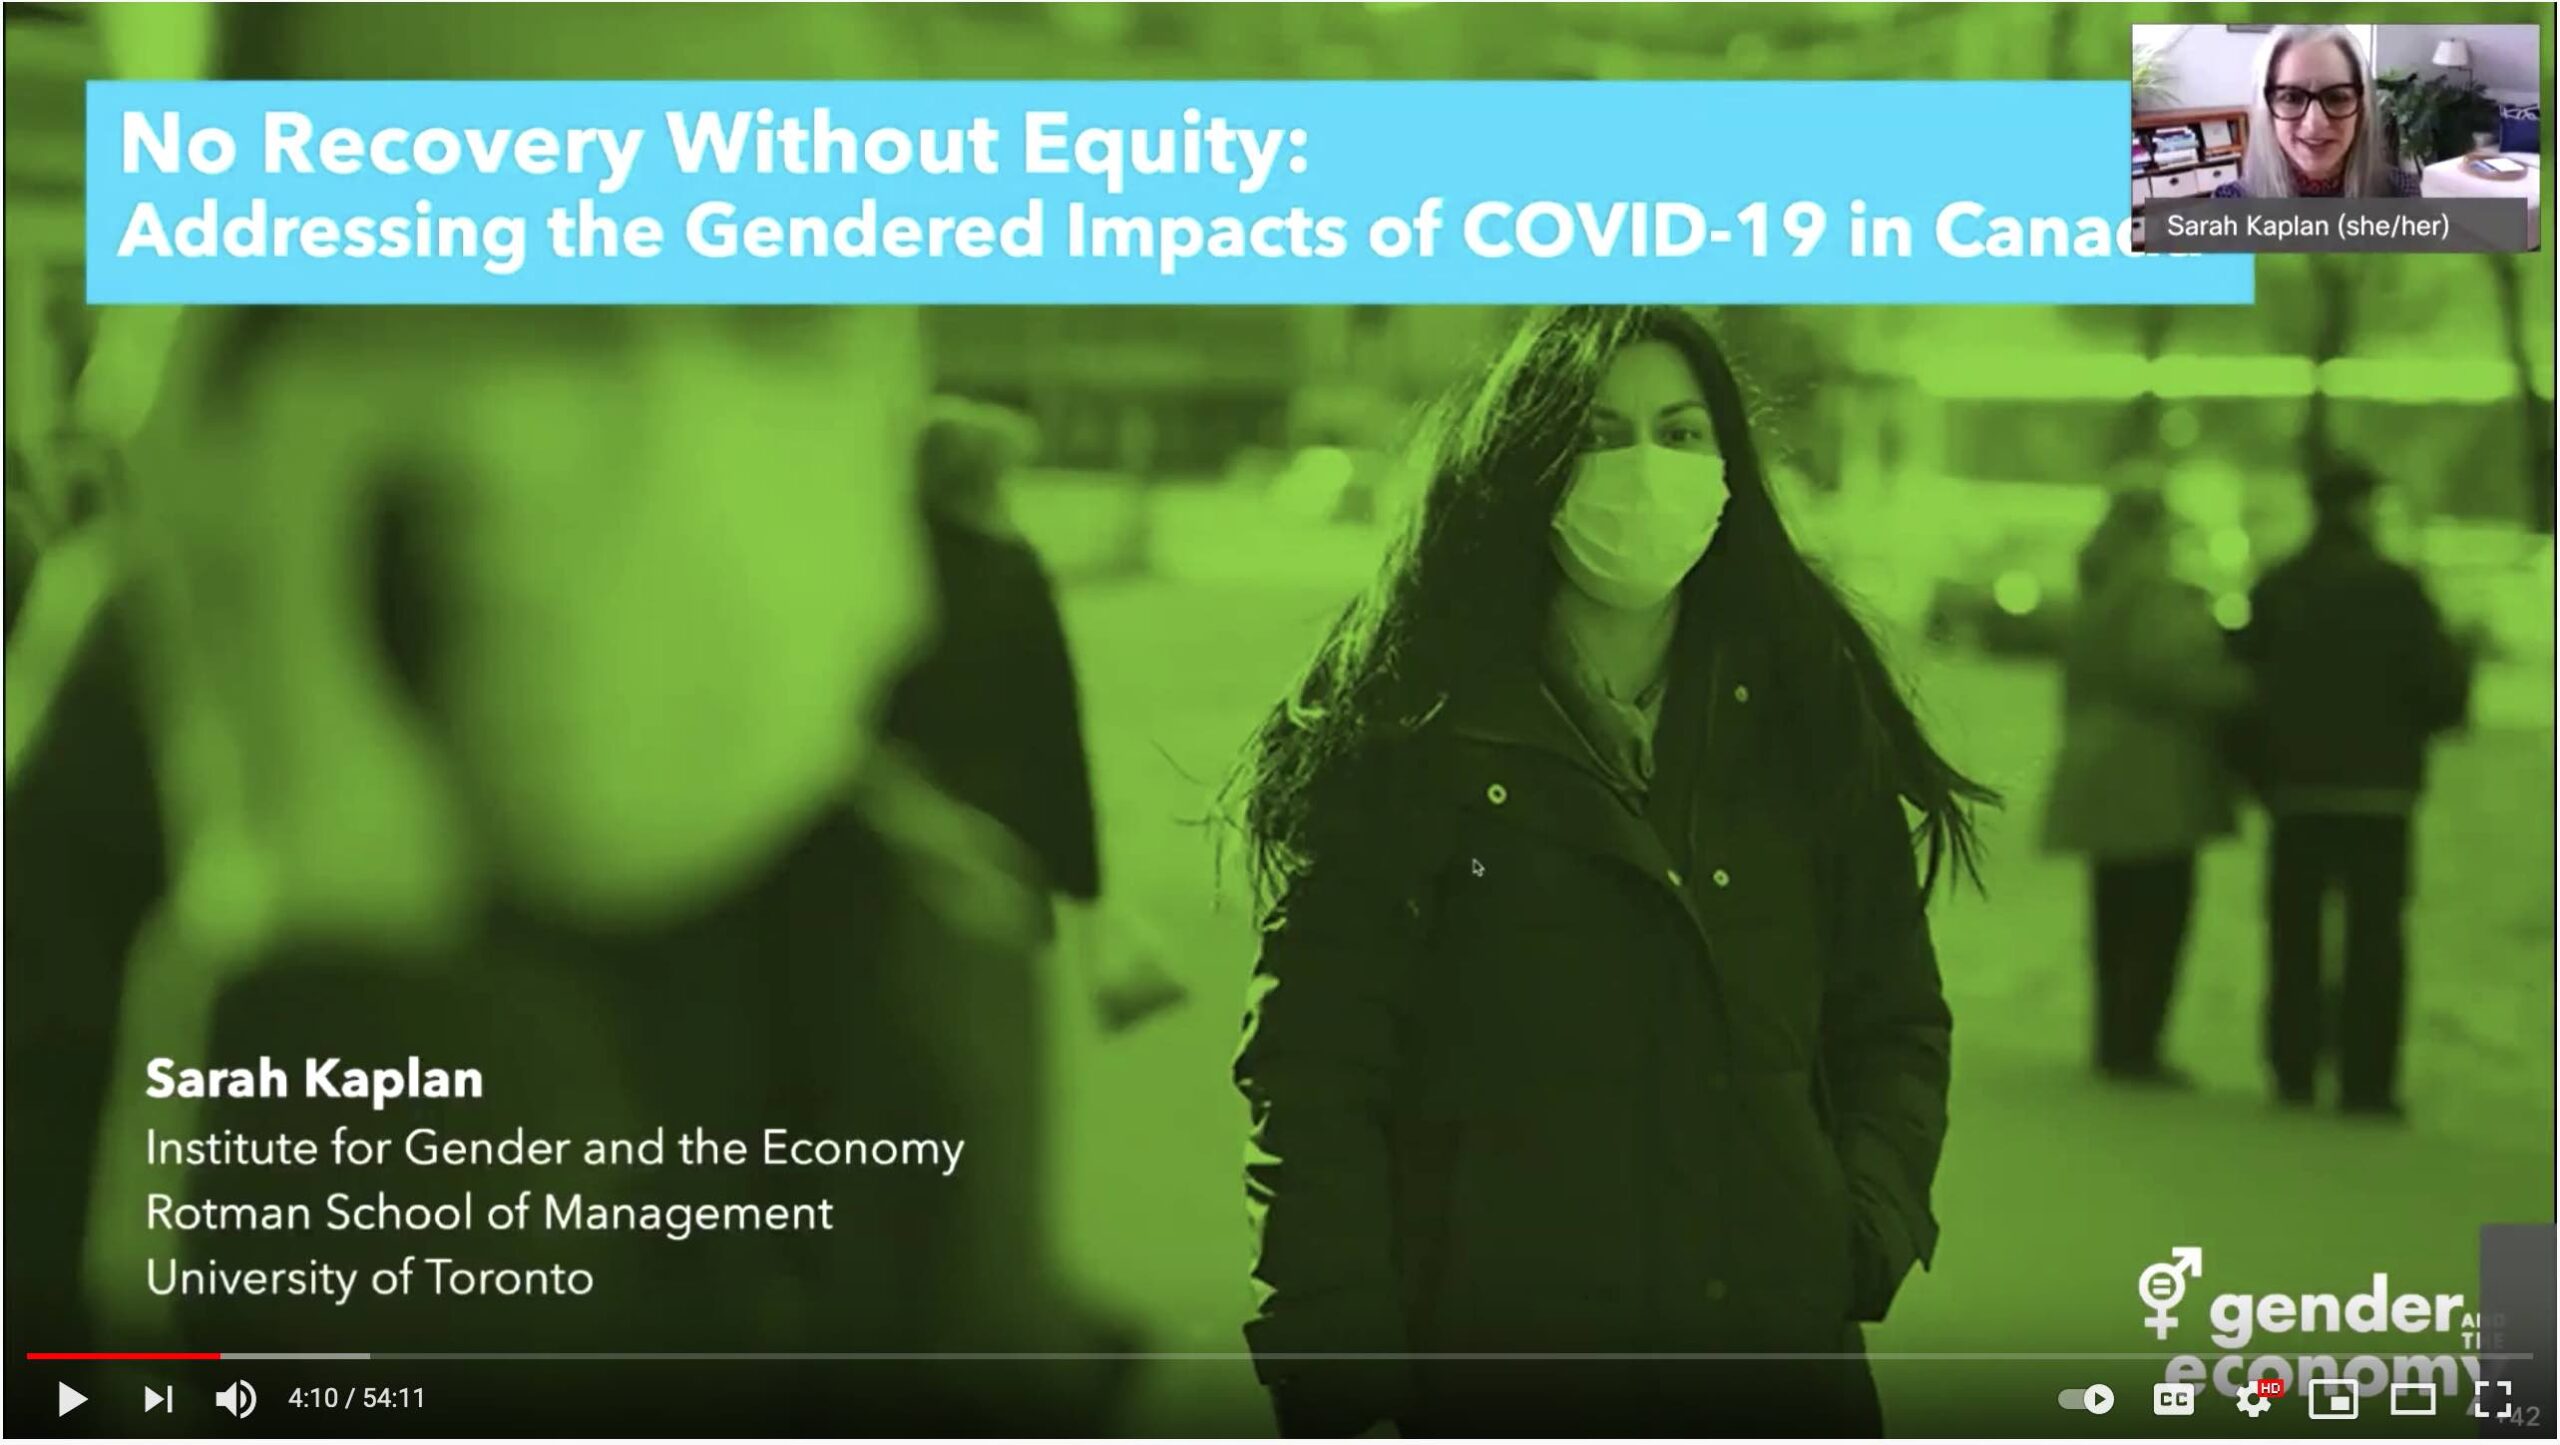 screenshot of video with image of woman wearing a medical mask and the text "no recovery without equity"